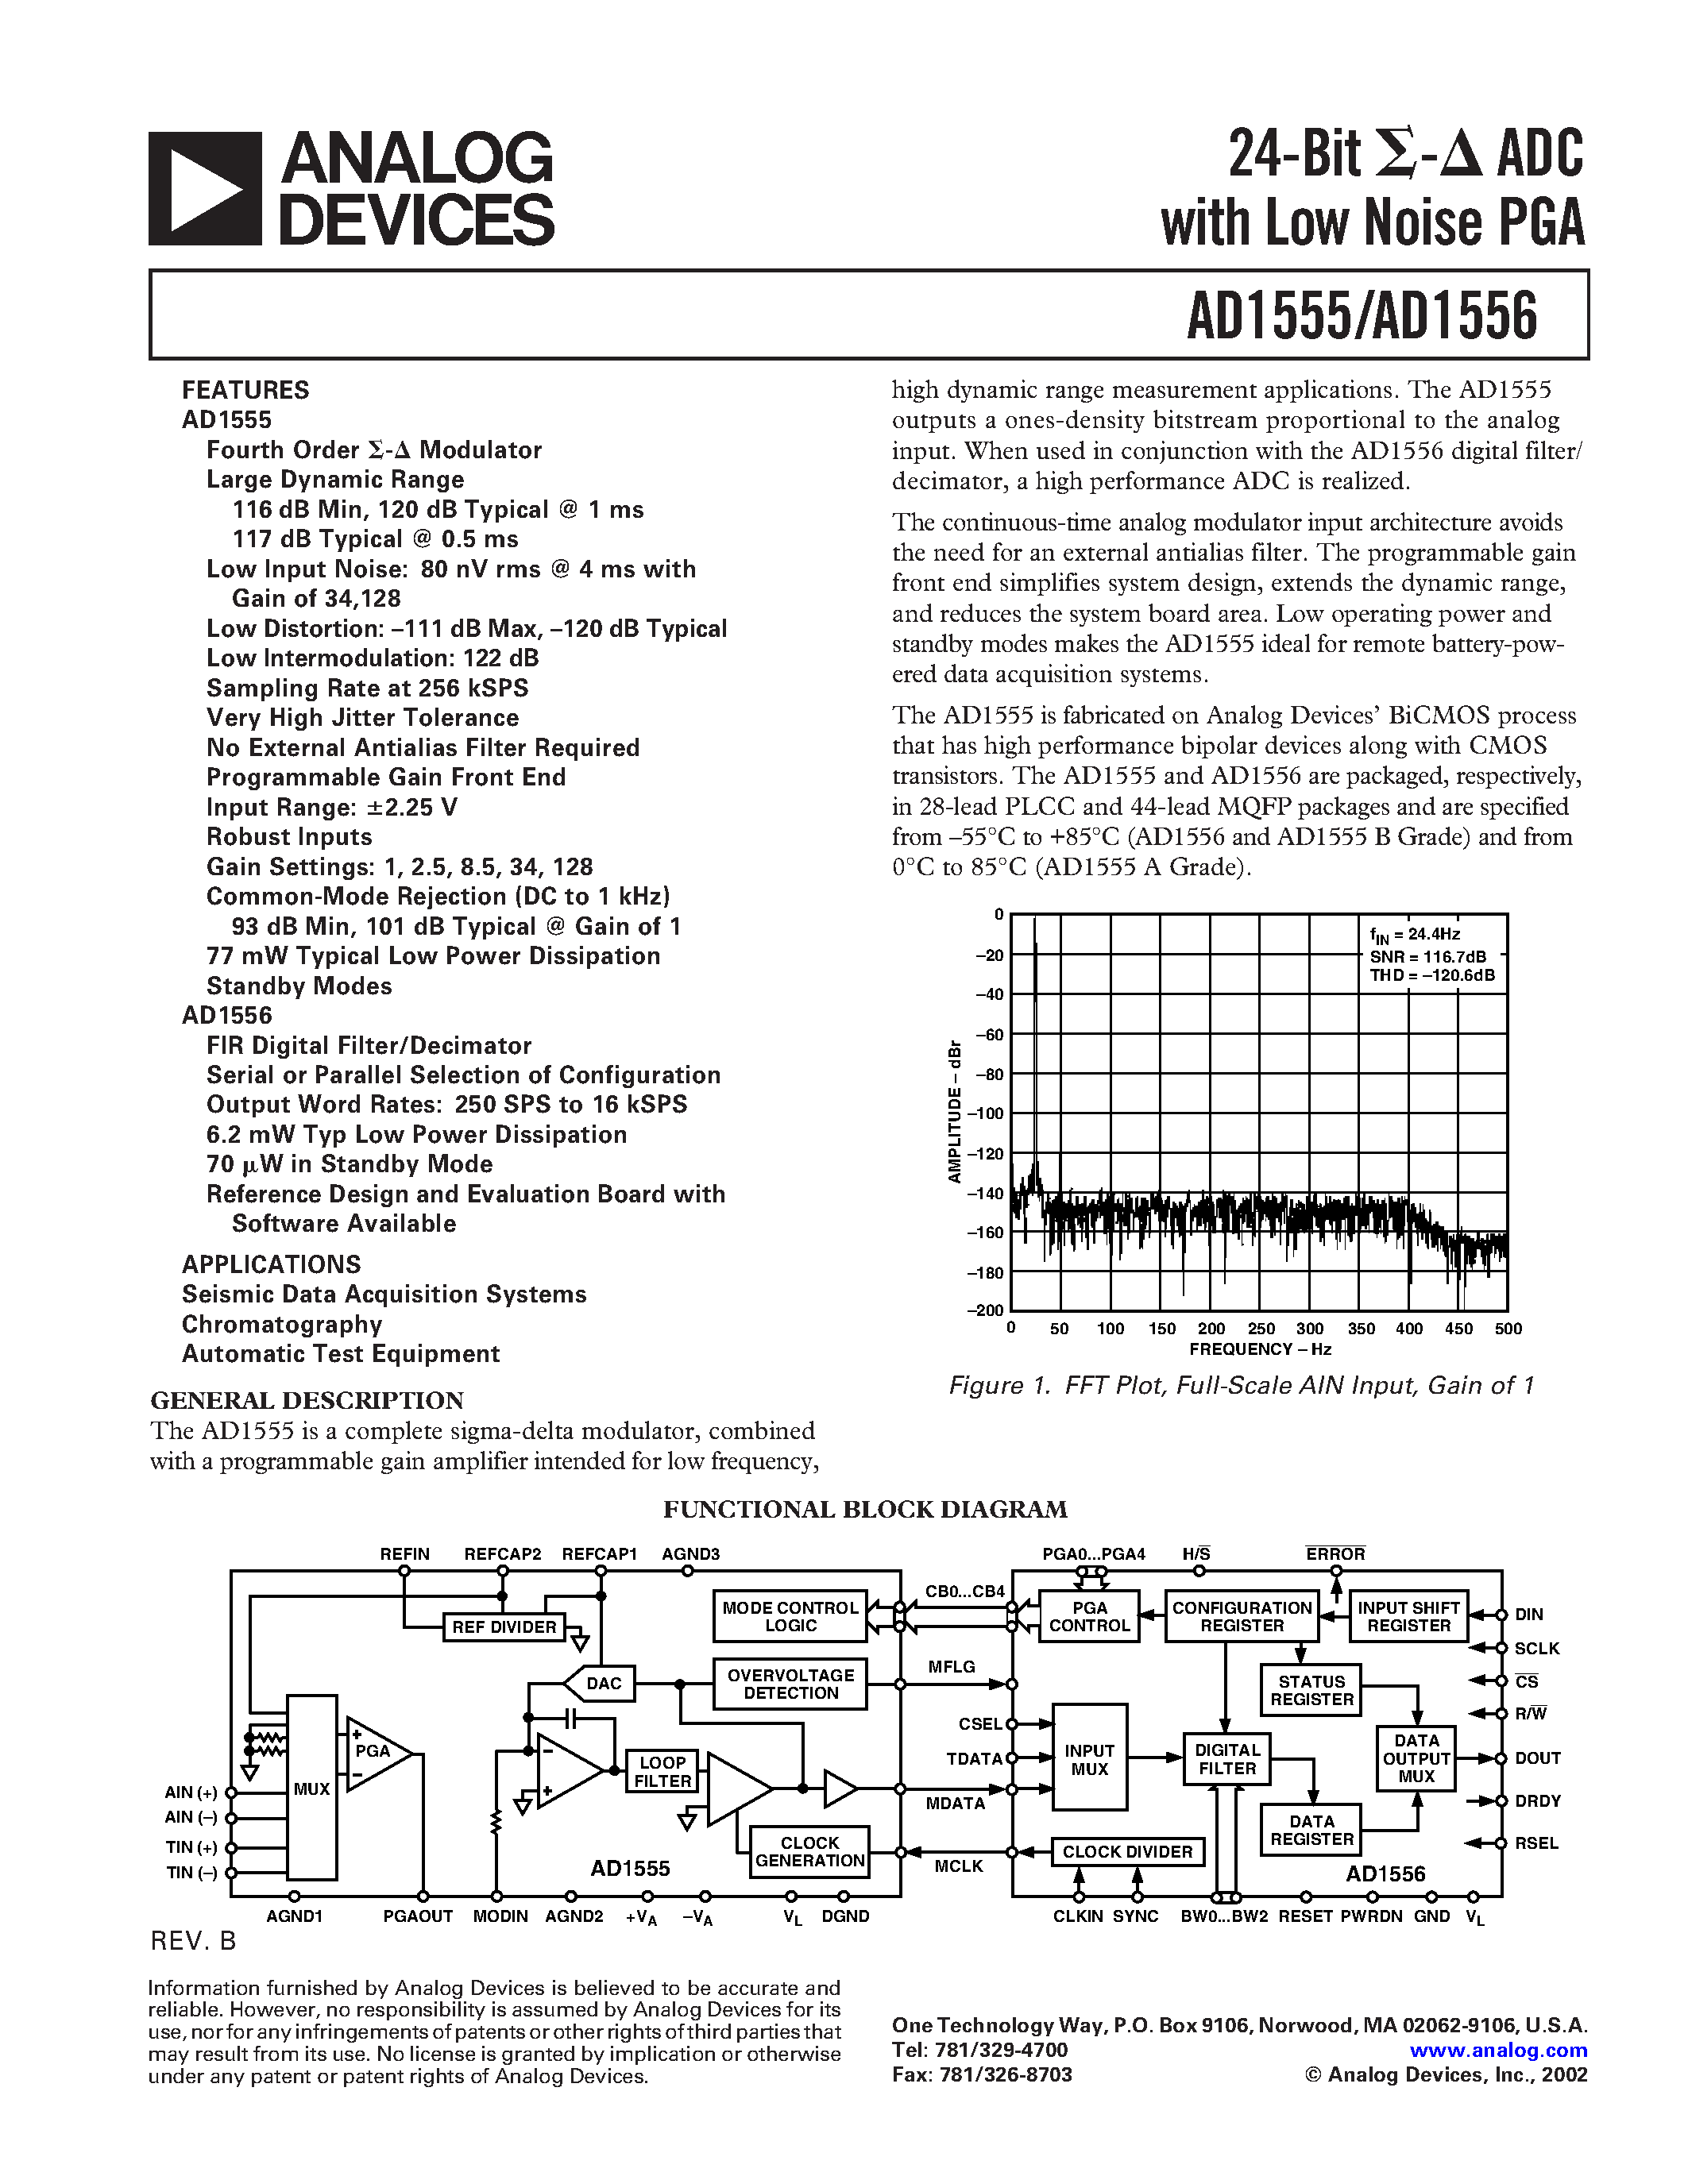 Datasheet AD1555-AD1556 - 24-Bit ADC WITH LOW NOISE PGA page 1